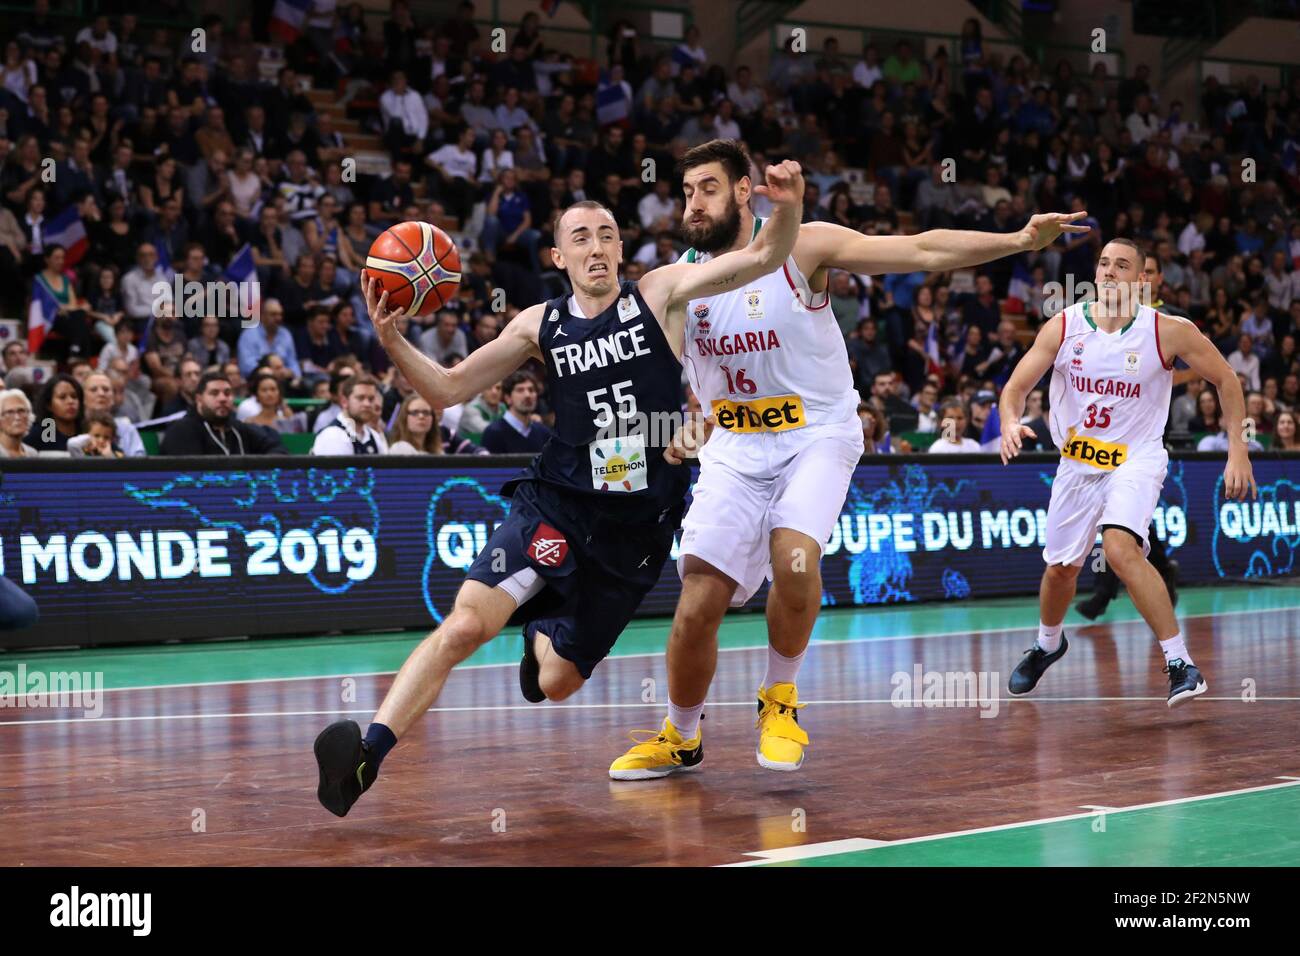 Jonathan Rousselle of France evades Nikolay Vangelov of Bulgaria during the  FIBA World Cup China 2019, Qualifying Group K Basketball match between  France and Bulgaria on December 3, 2018 at Beaublanc Sports